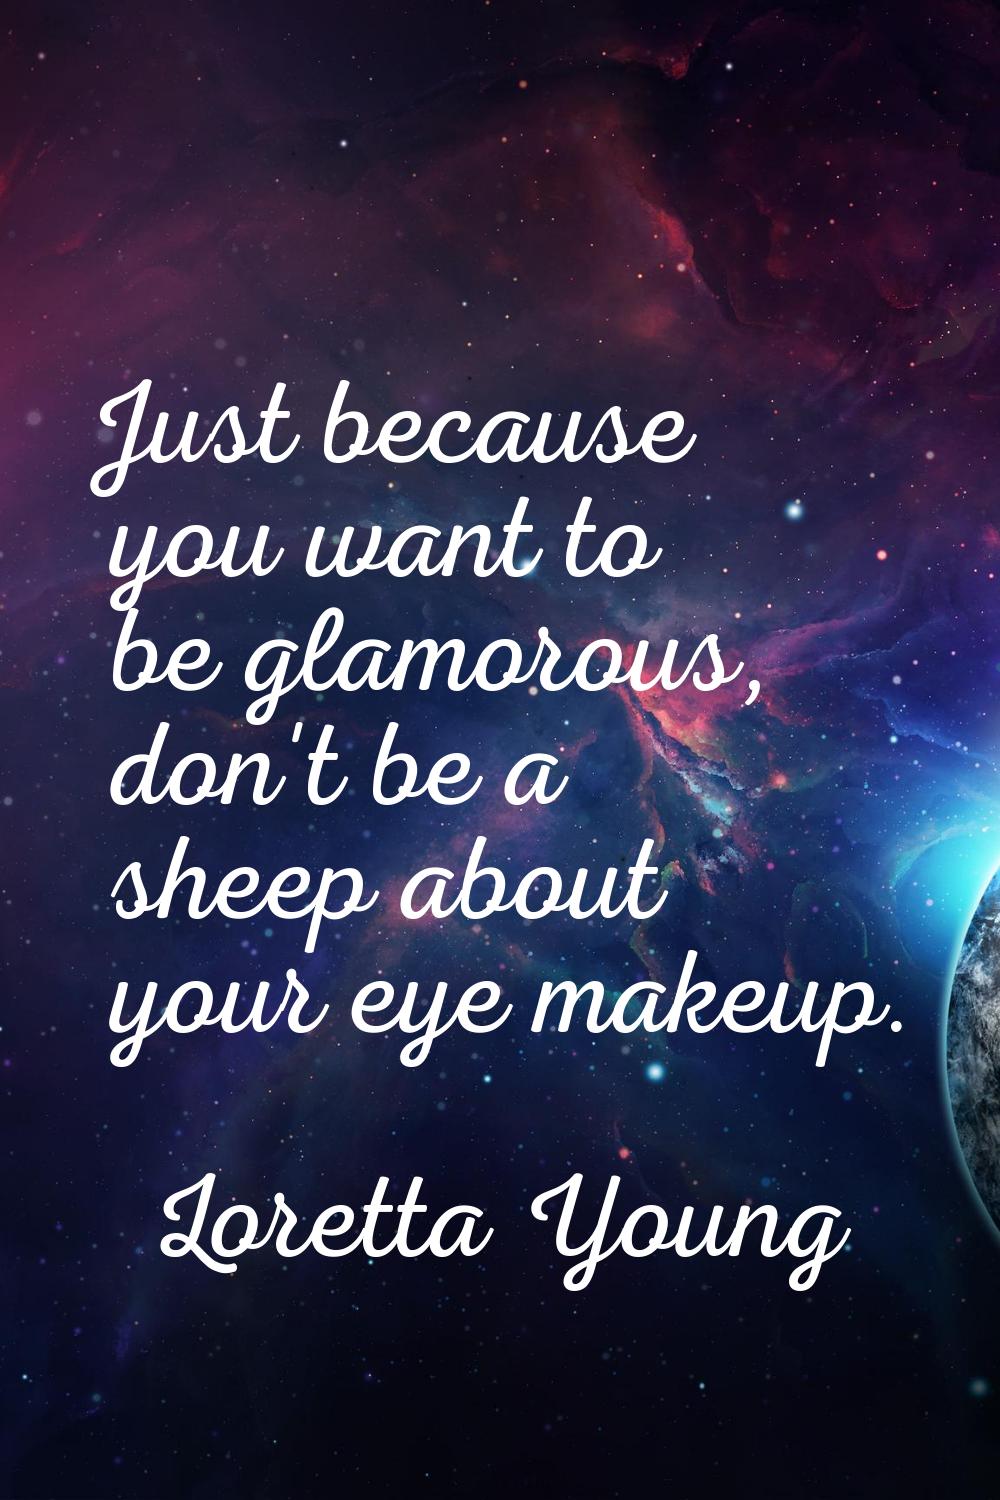 Just because you want to be glamorous, don't be a sheep about your eye makeup.